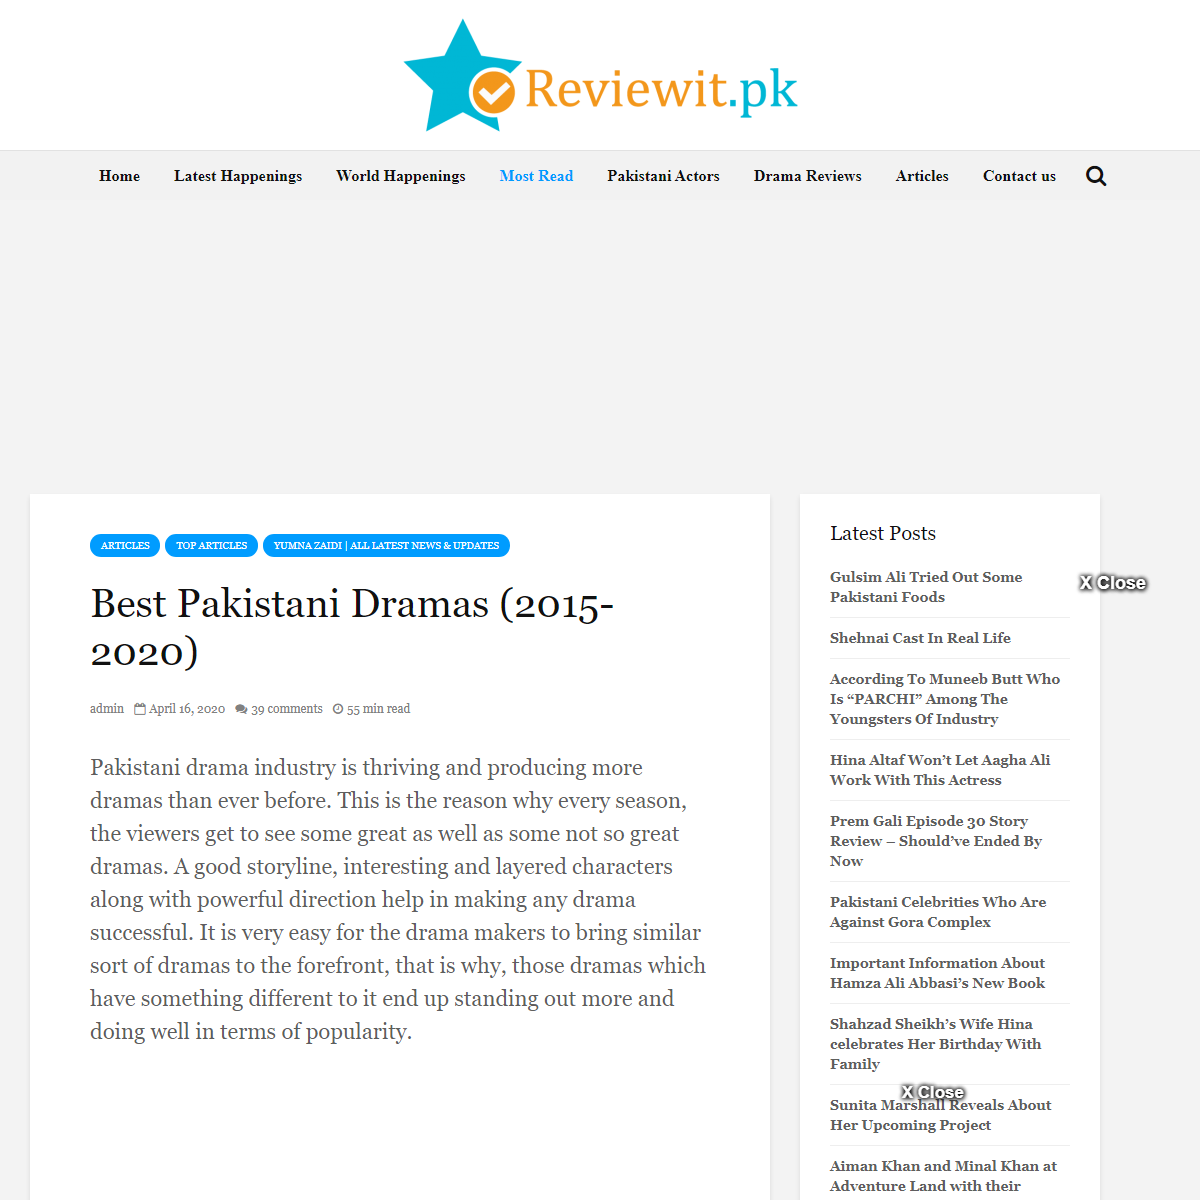 A complete backup of https://reviewit.pk/best-pakistani-dramas/